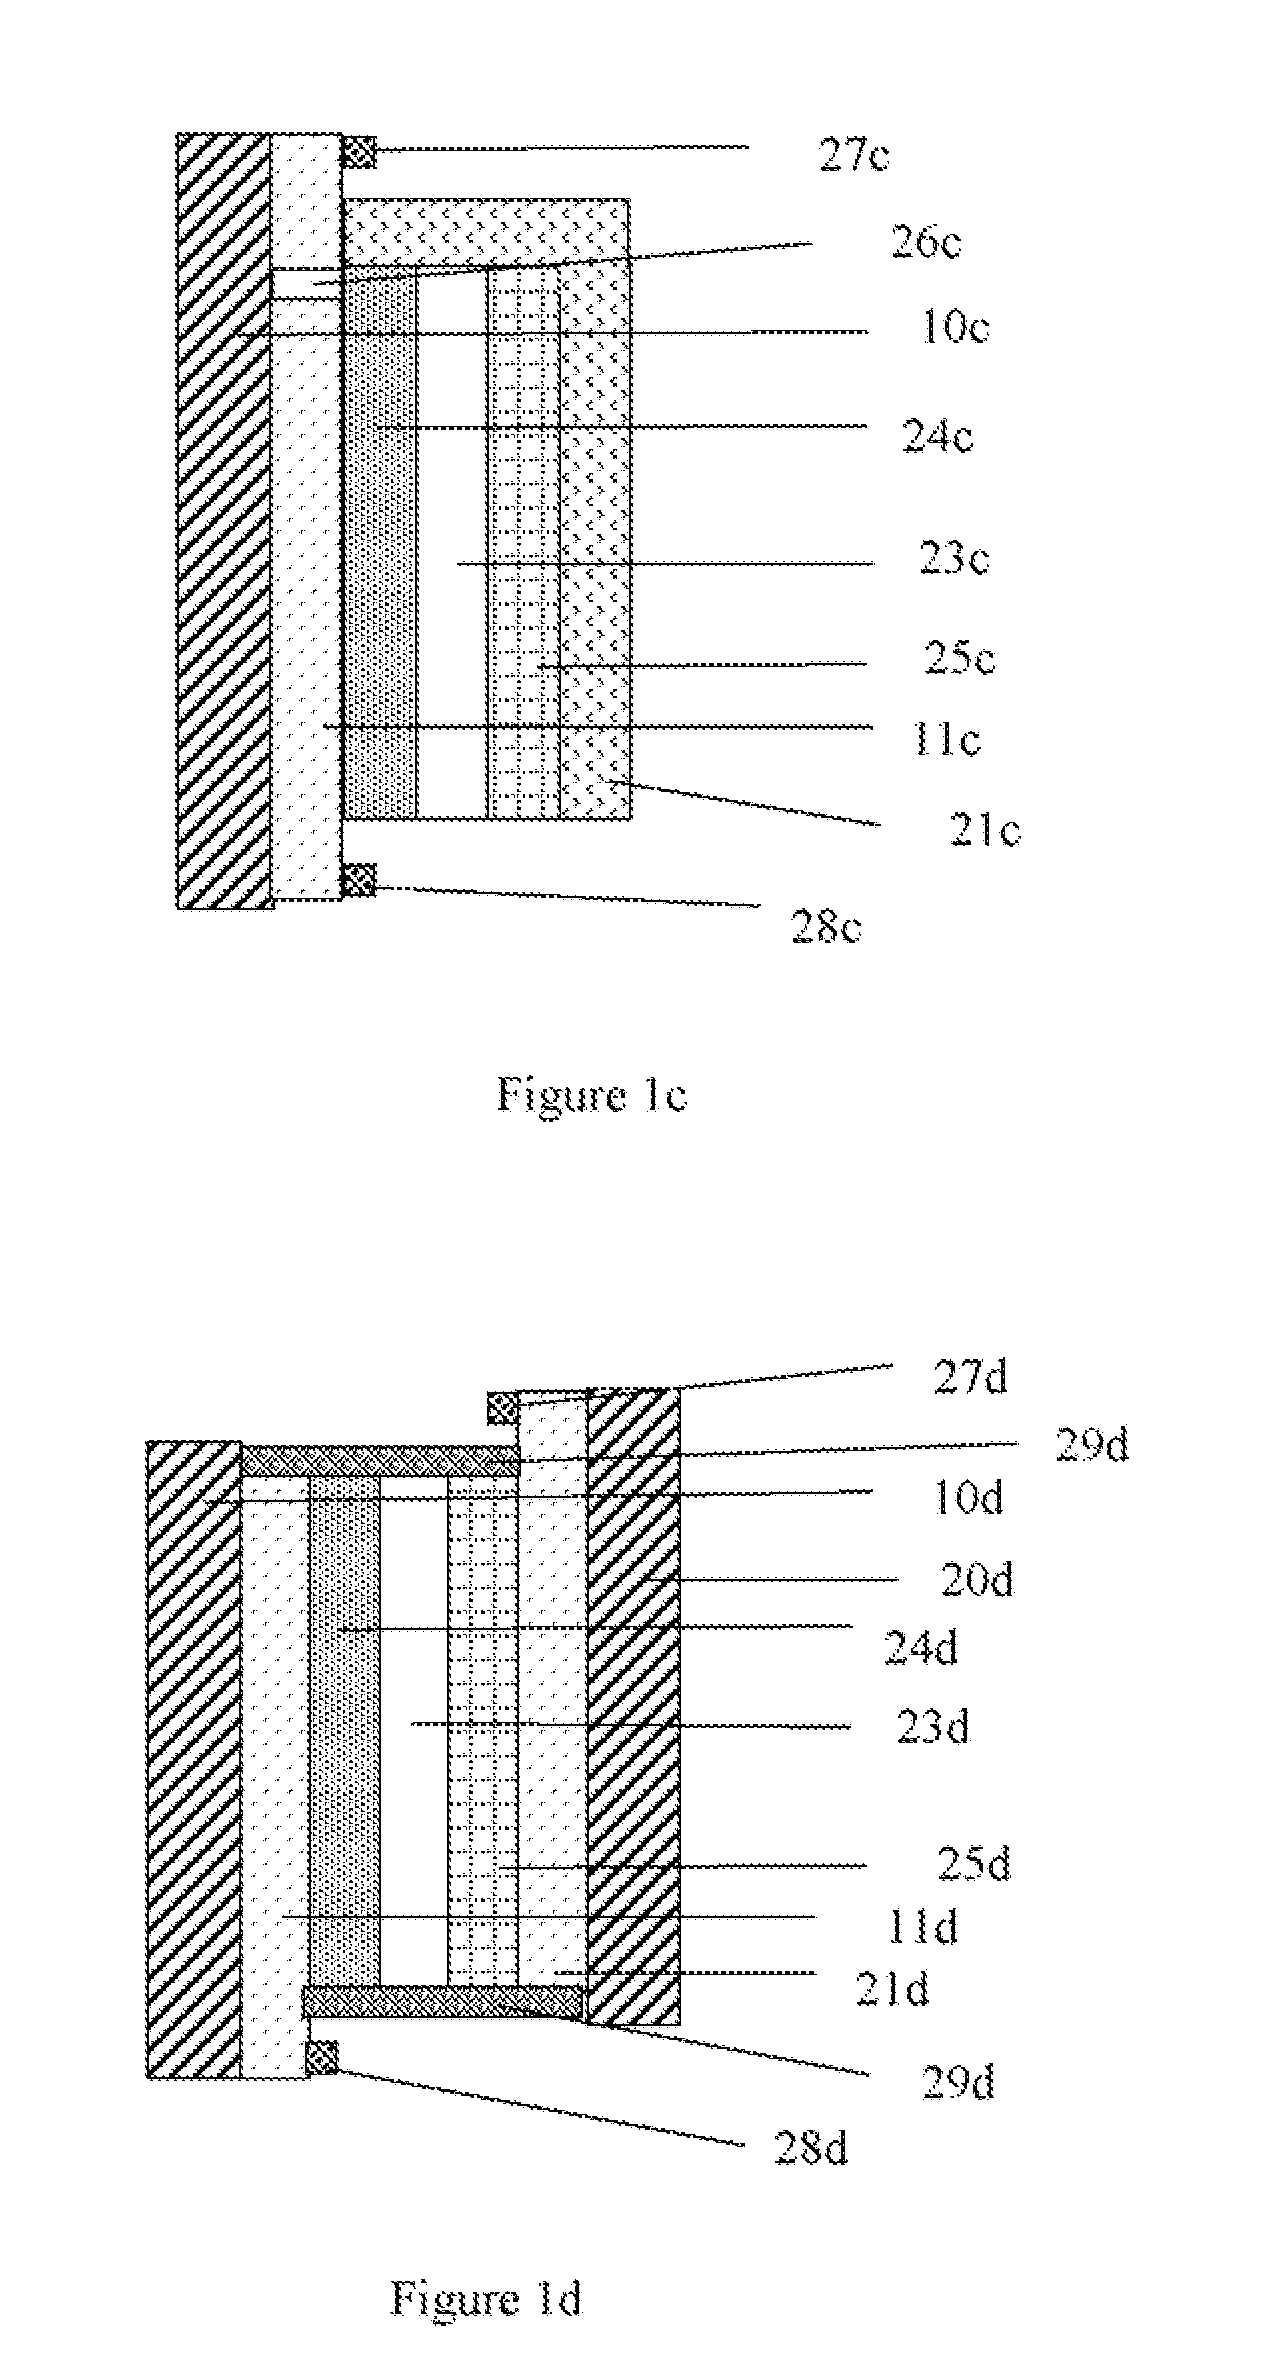 Sealants and conductive busbars for chromogenic devices